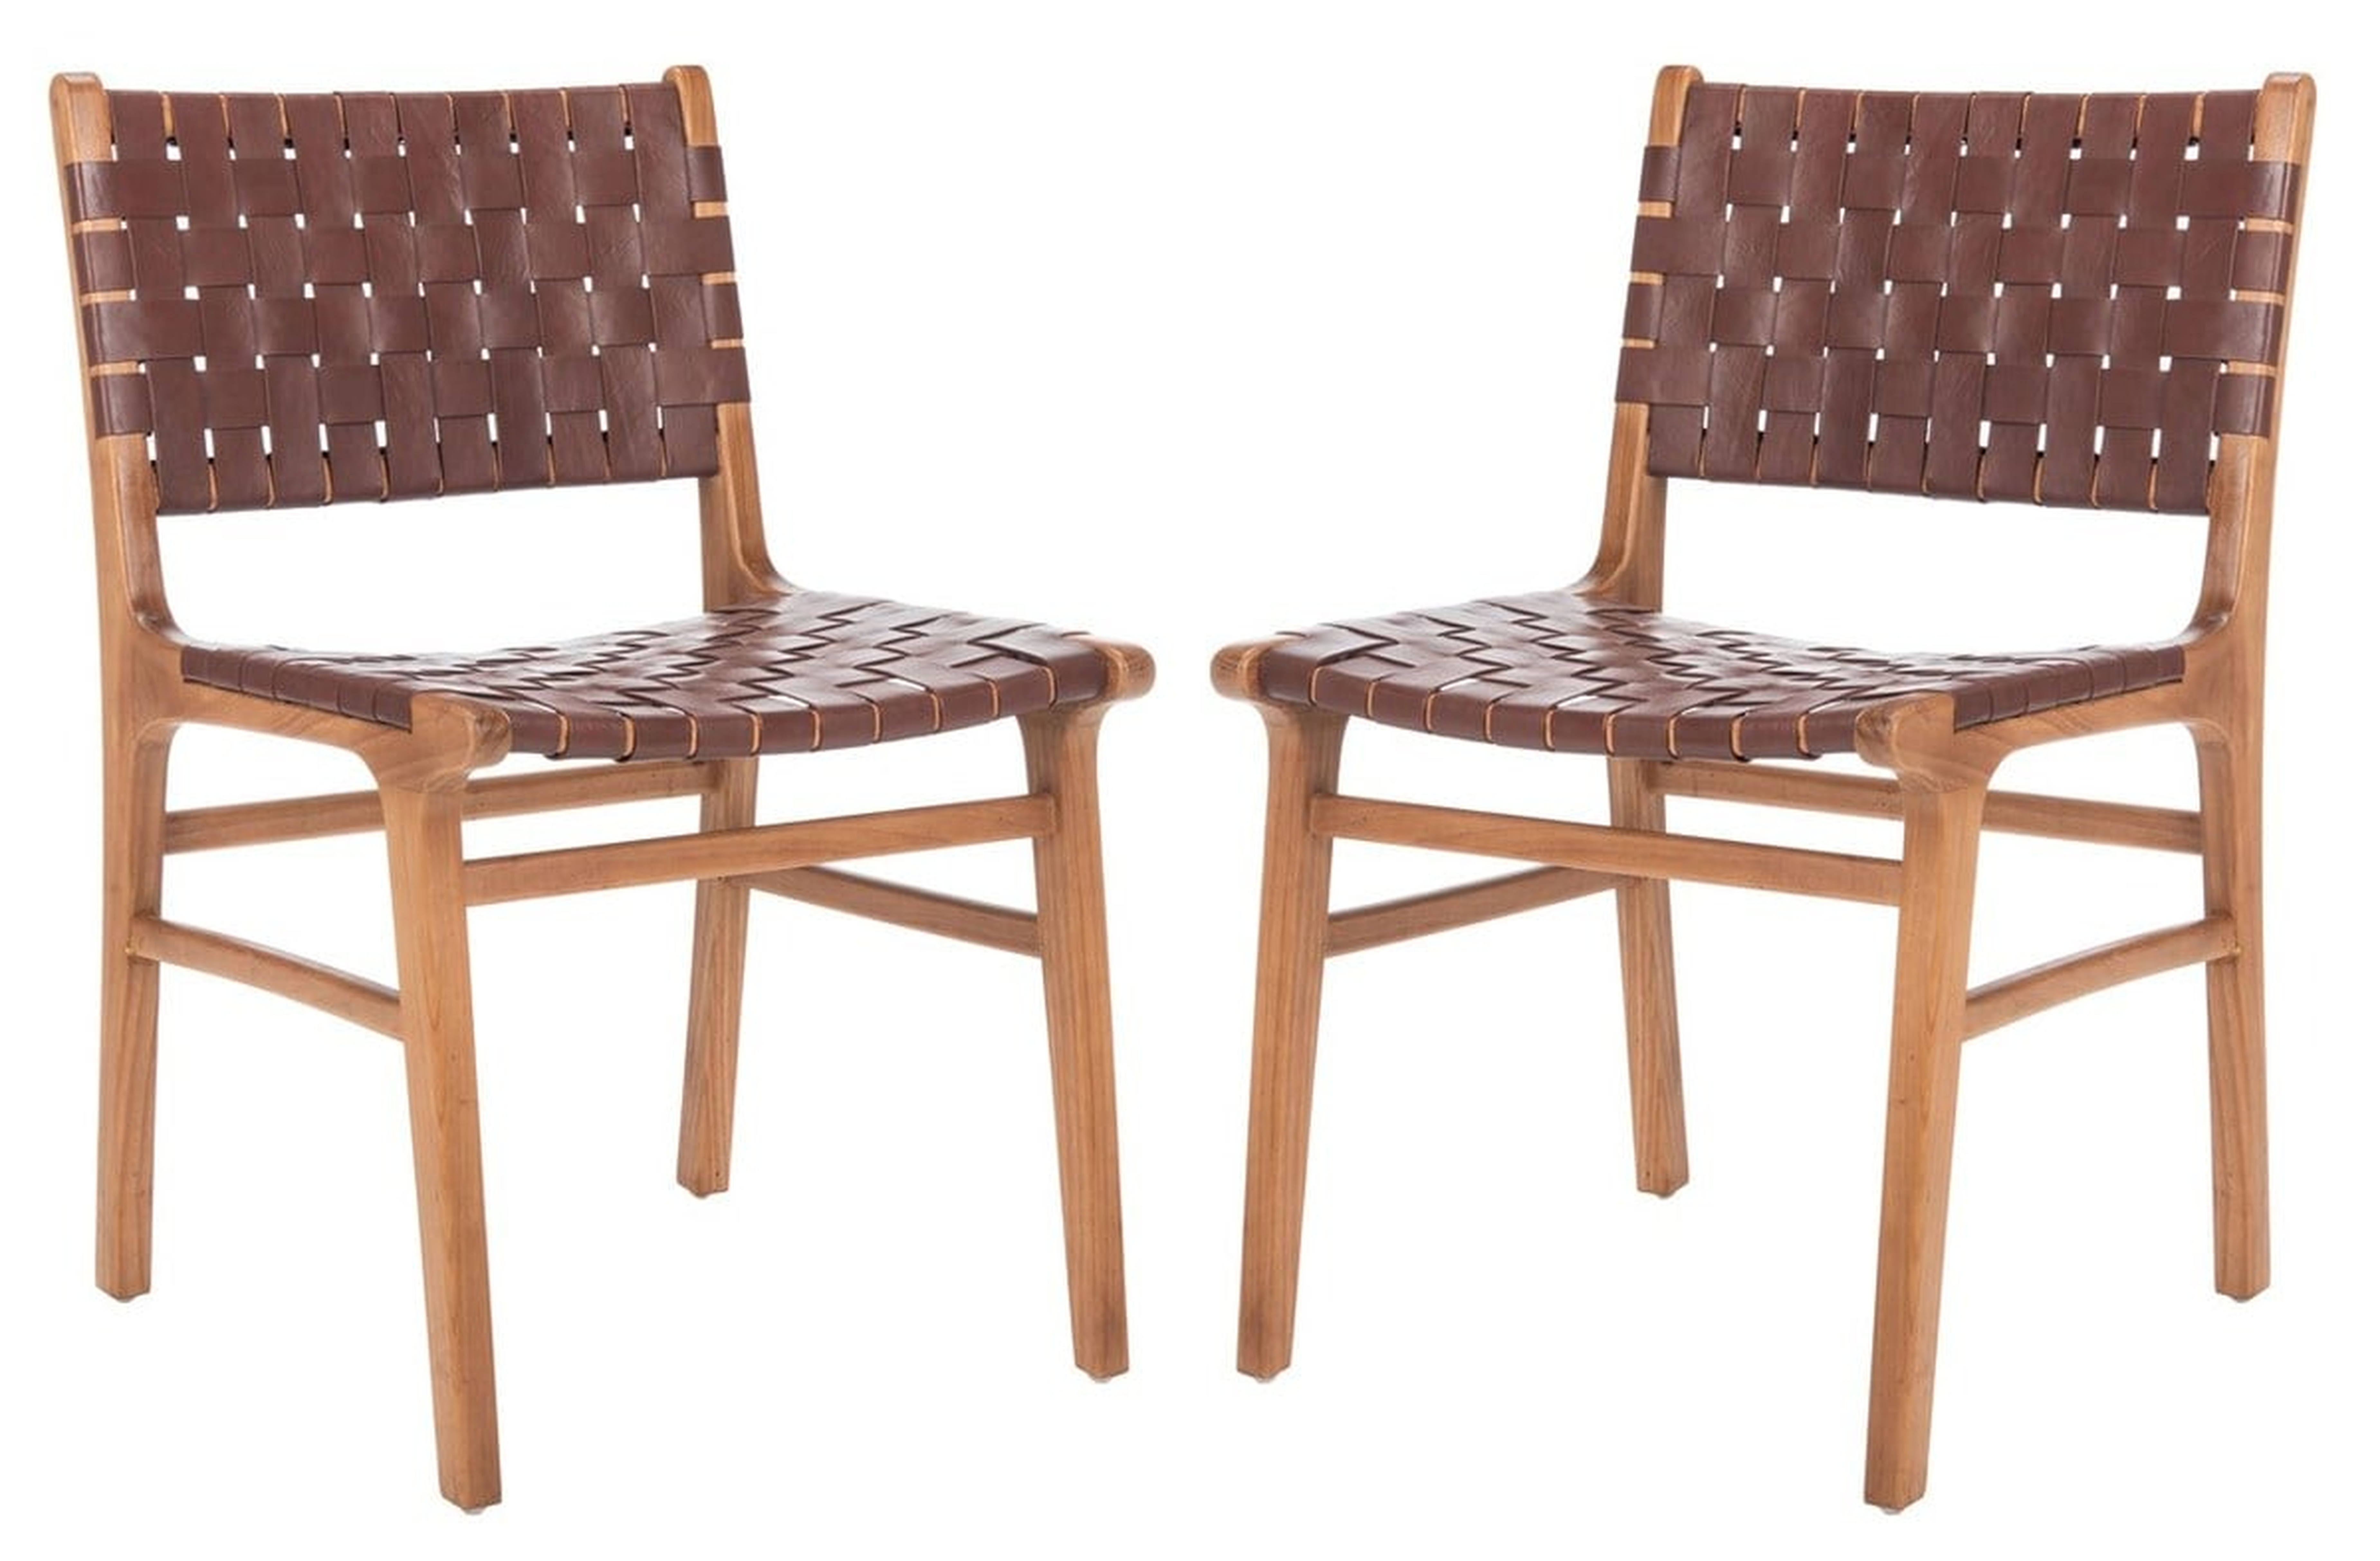 Taika Woven Leather Dining Chair (Set of 2) - Cognac/Natural - Arlo Home - Arlo Home